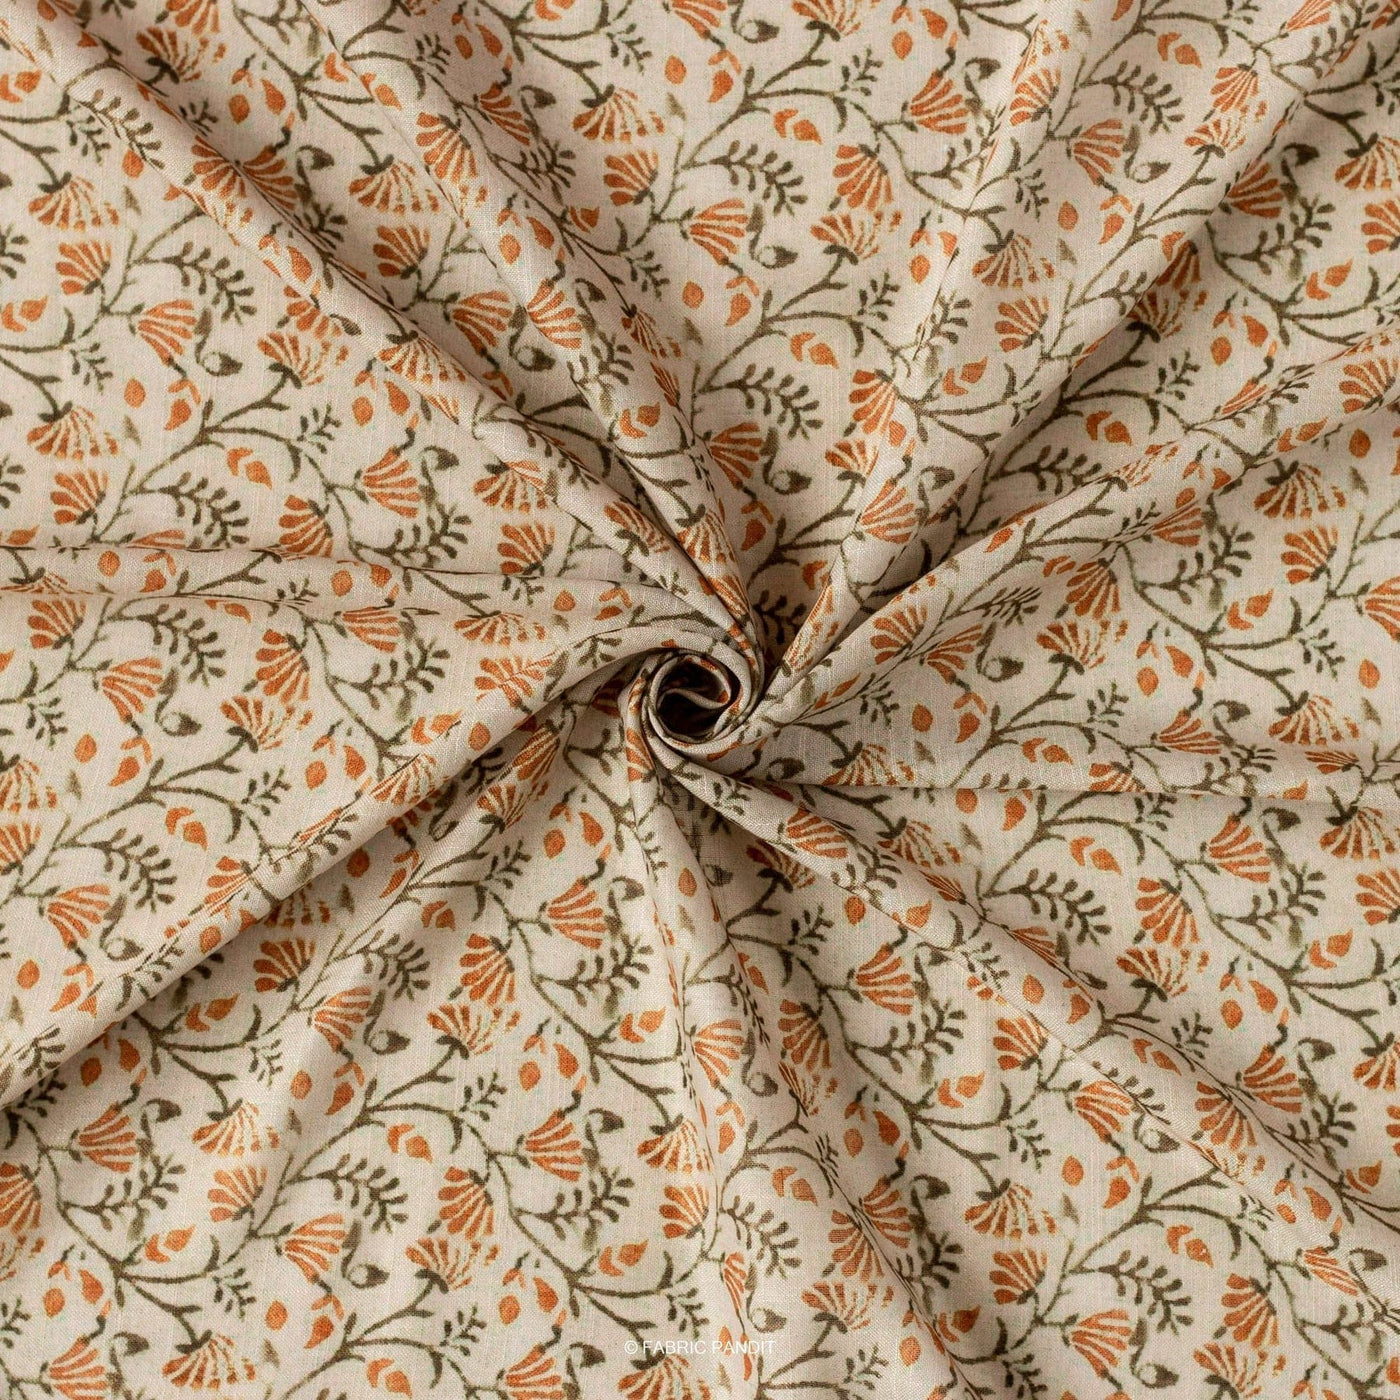 Fabric Pandit Fabric Orange And Khaki Continuous Floral Pattern Digital Printed Linen Fabric (Width 44 Inches)